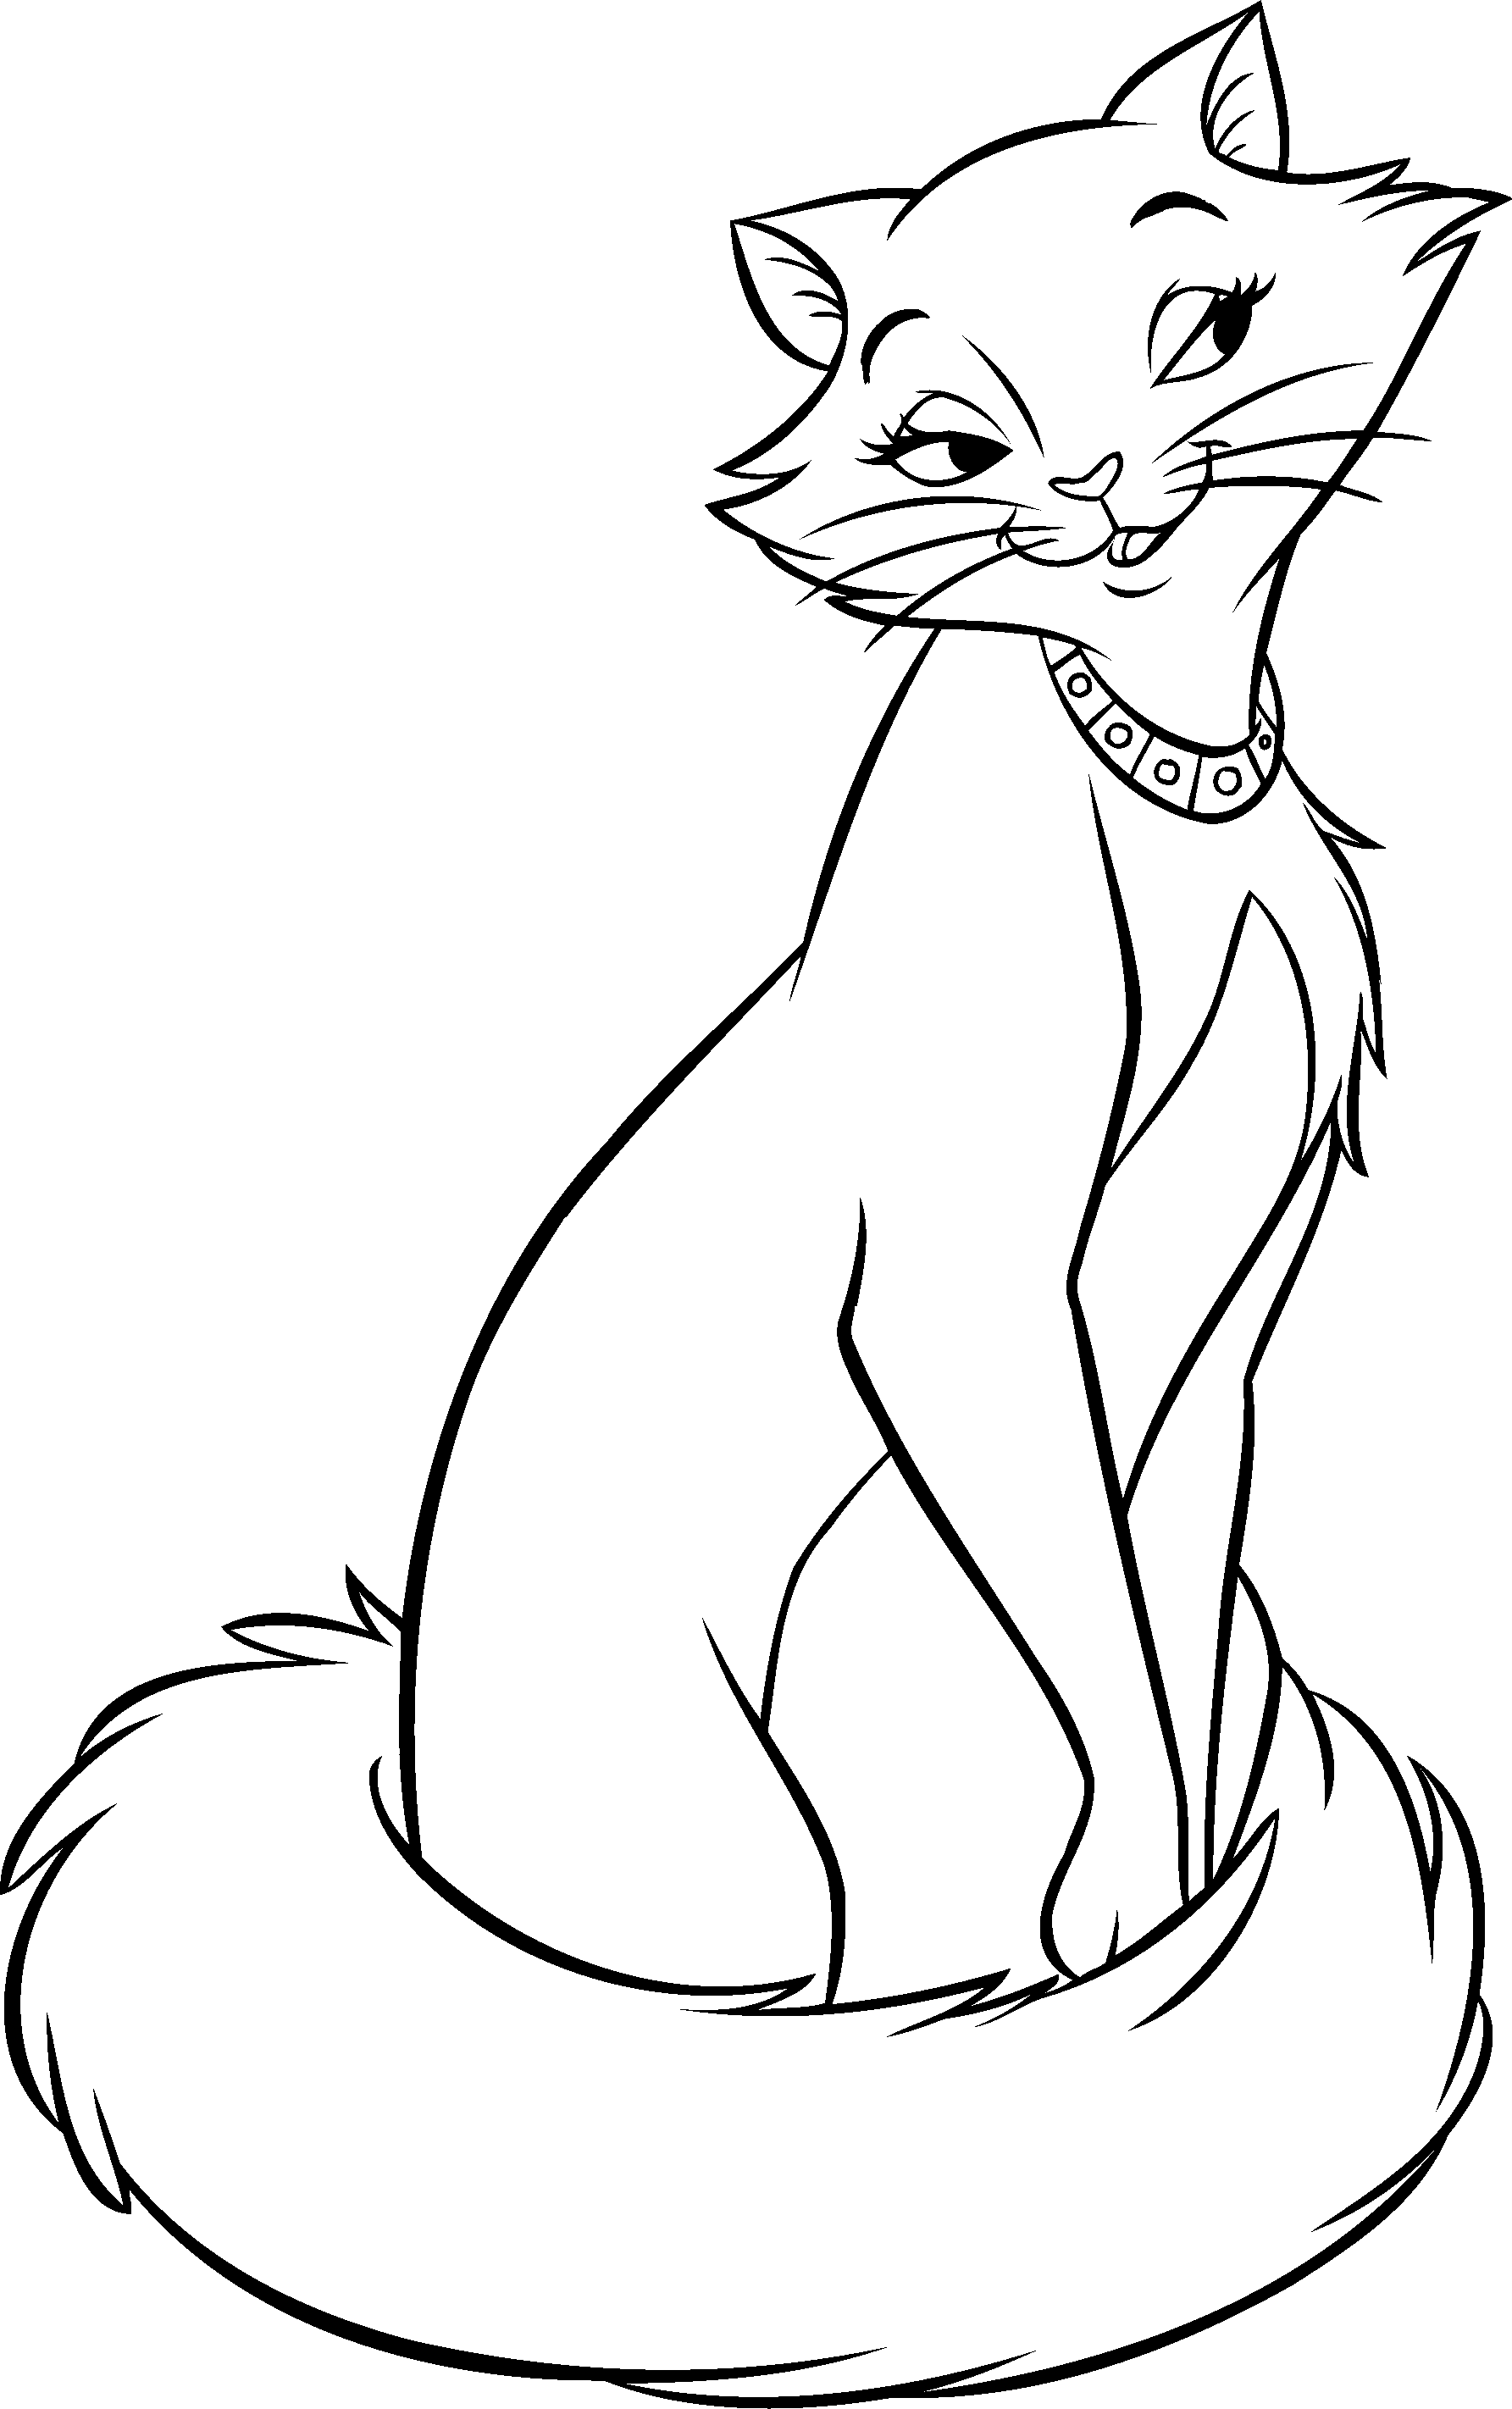 Cat color pages printable. Kangaroo clipart colouring page